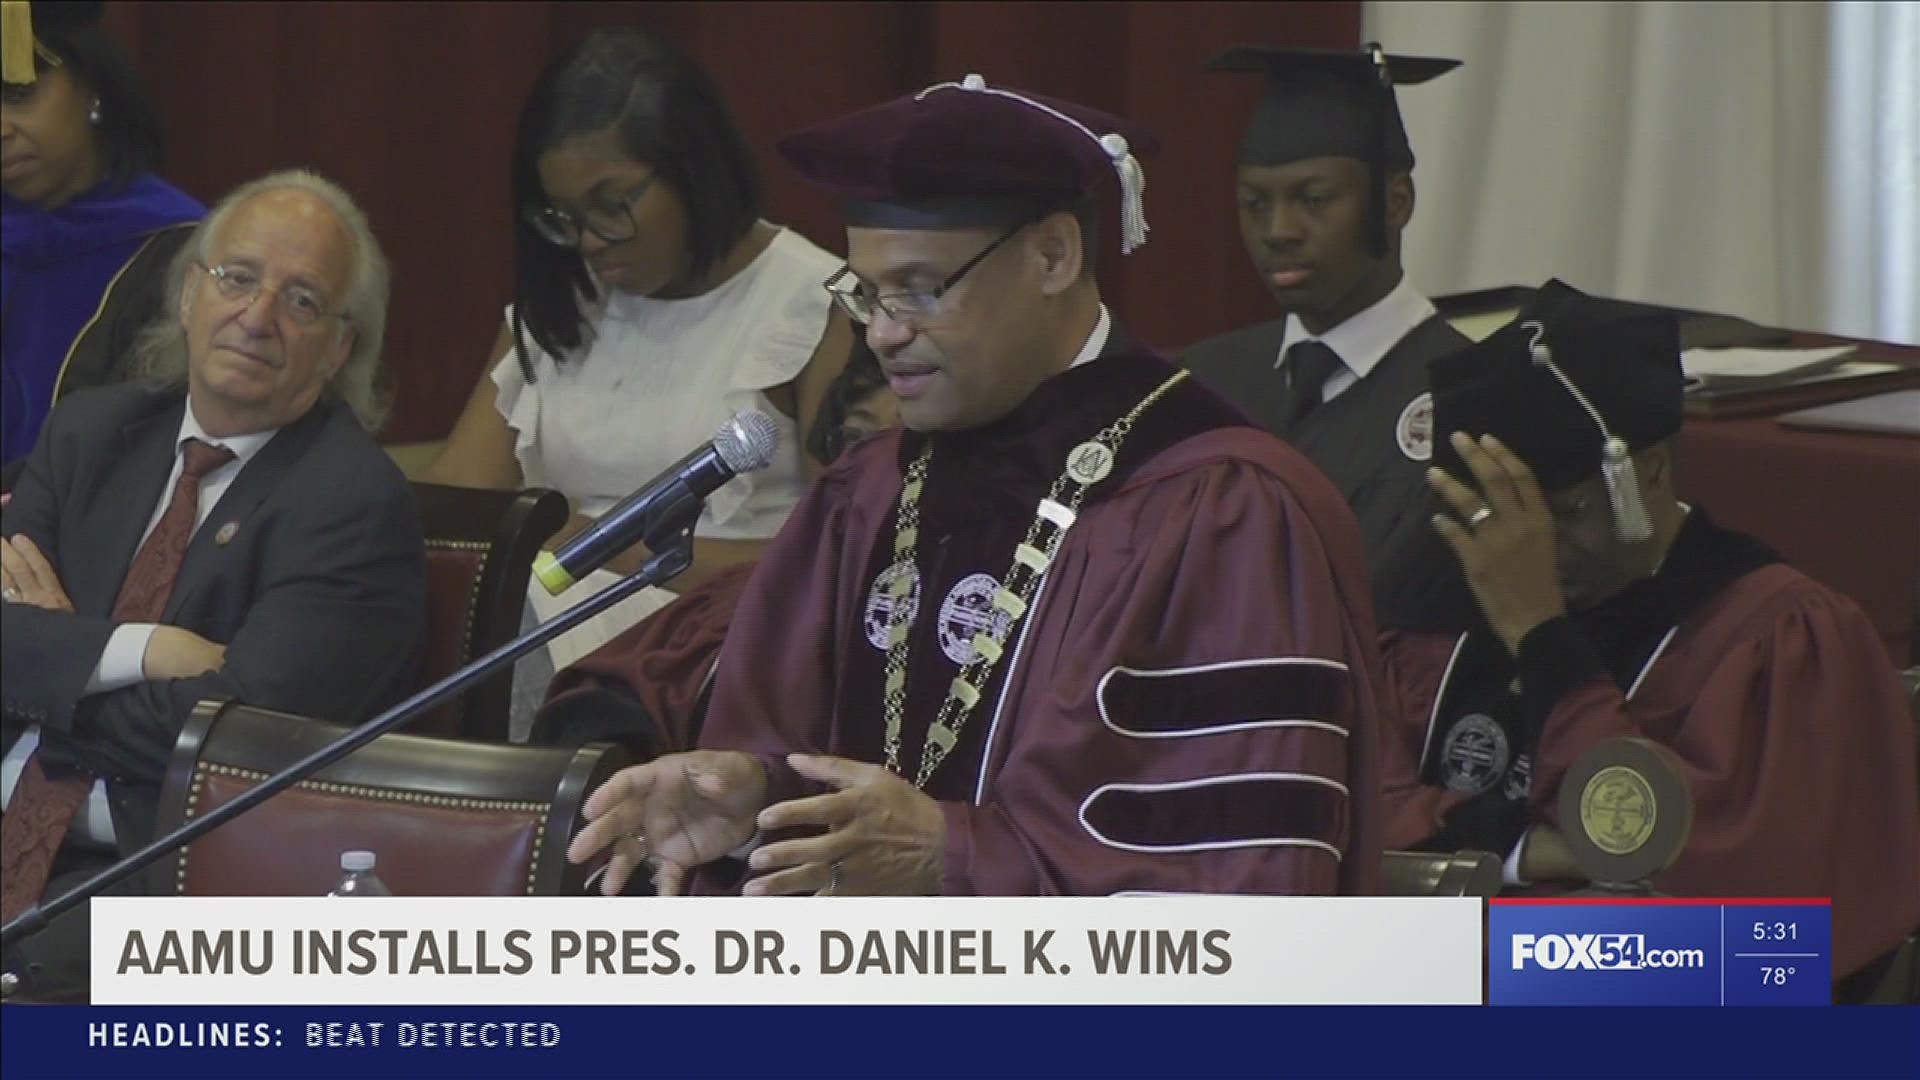 Dr. Daniel K. Wims is the 12th president of Alabama A&M University